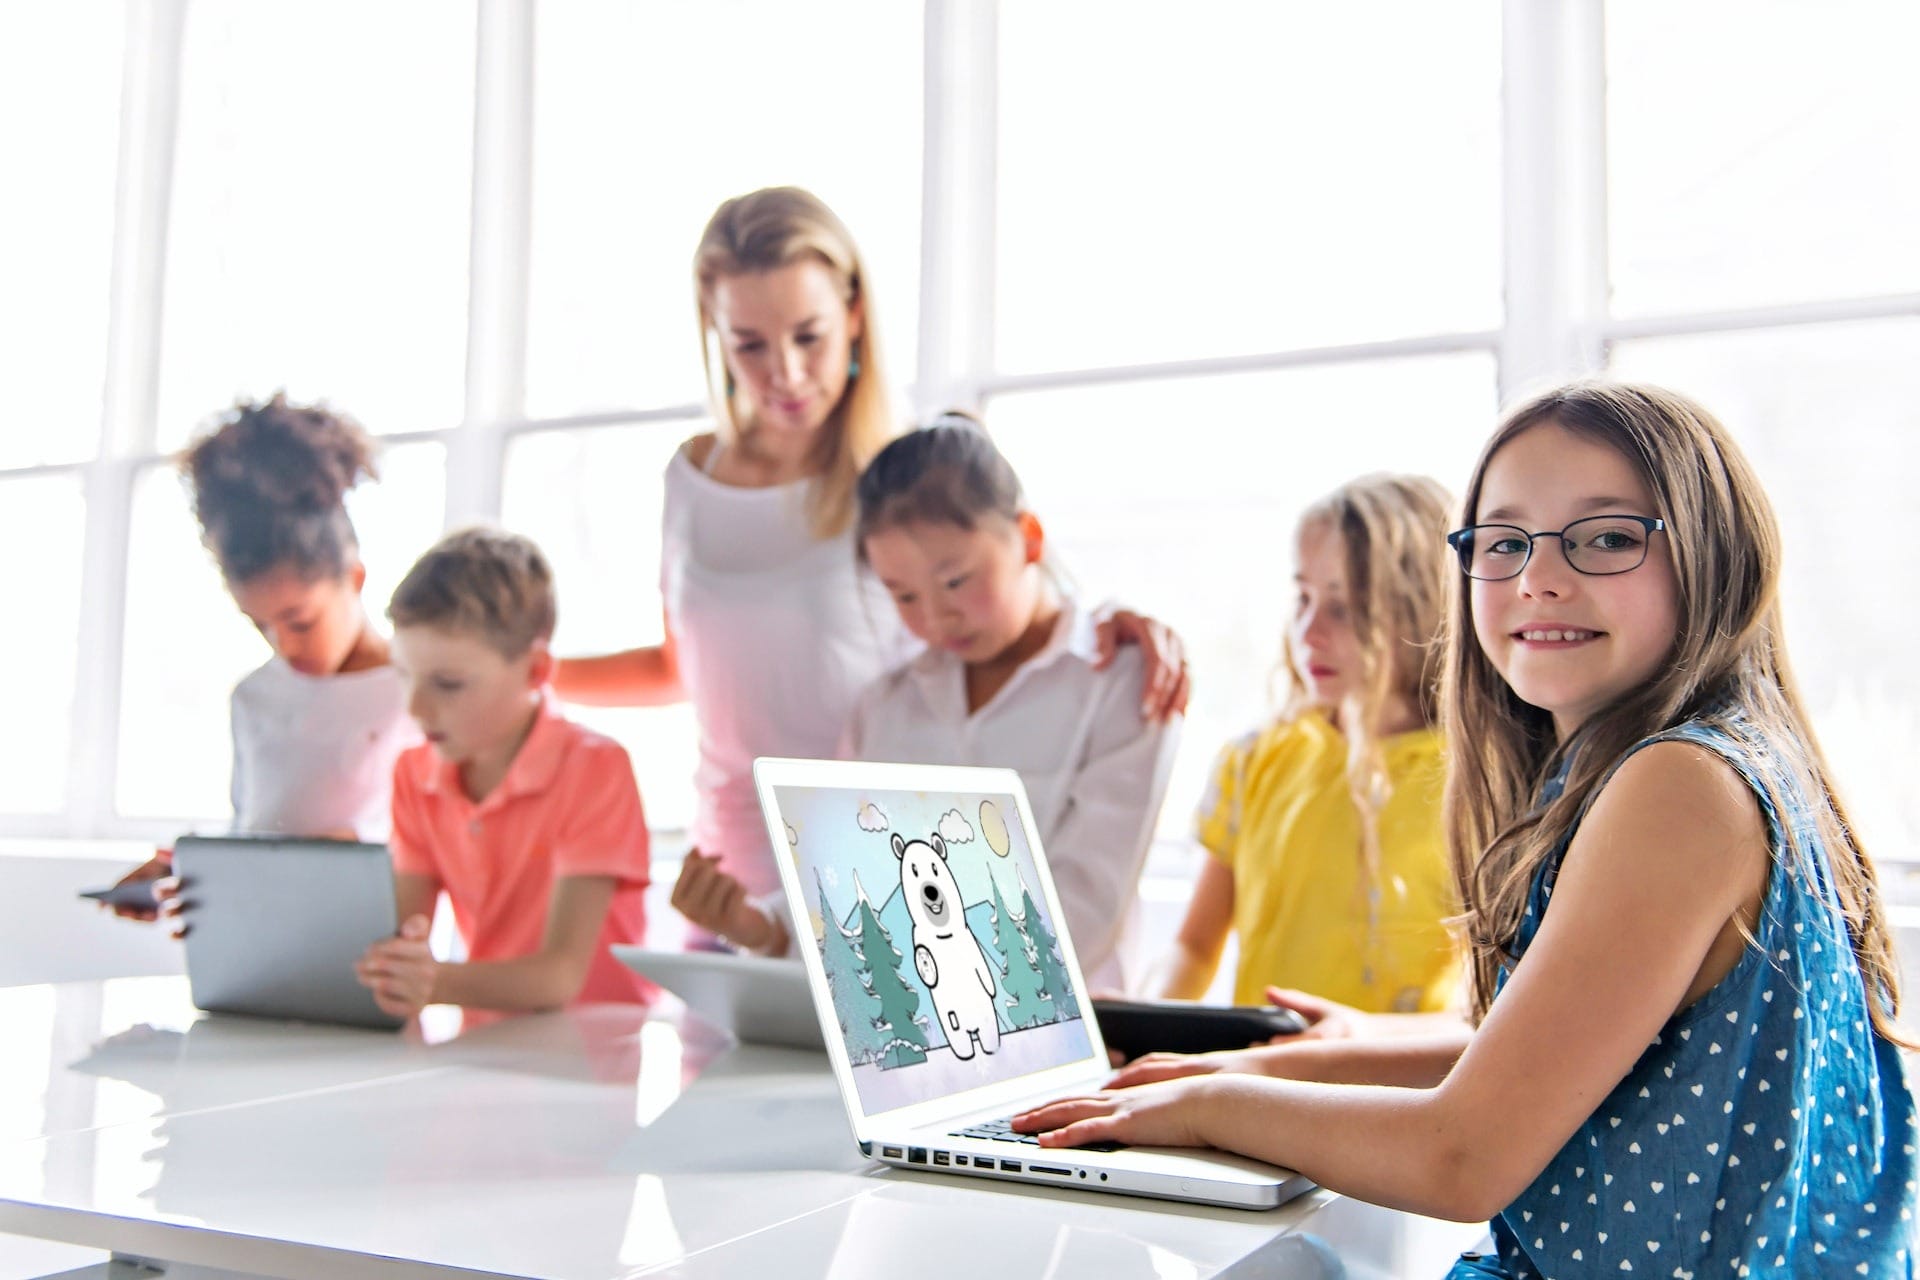 A group of children engaged in a science project using laptops at a table with a female adult supervising.